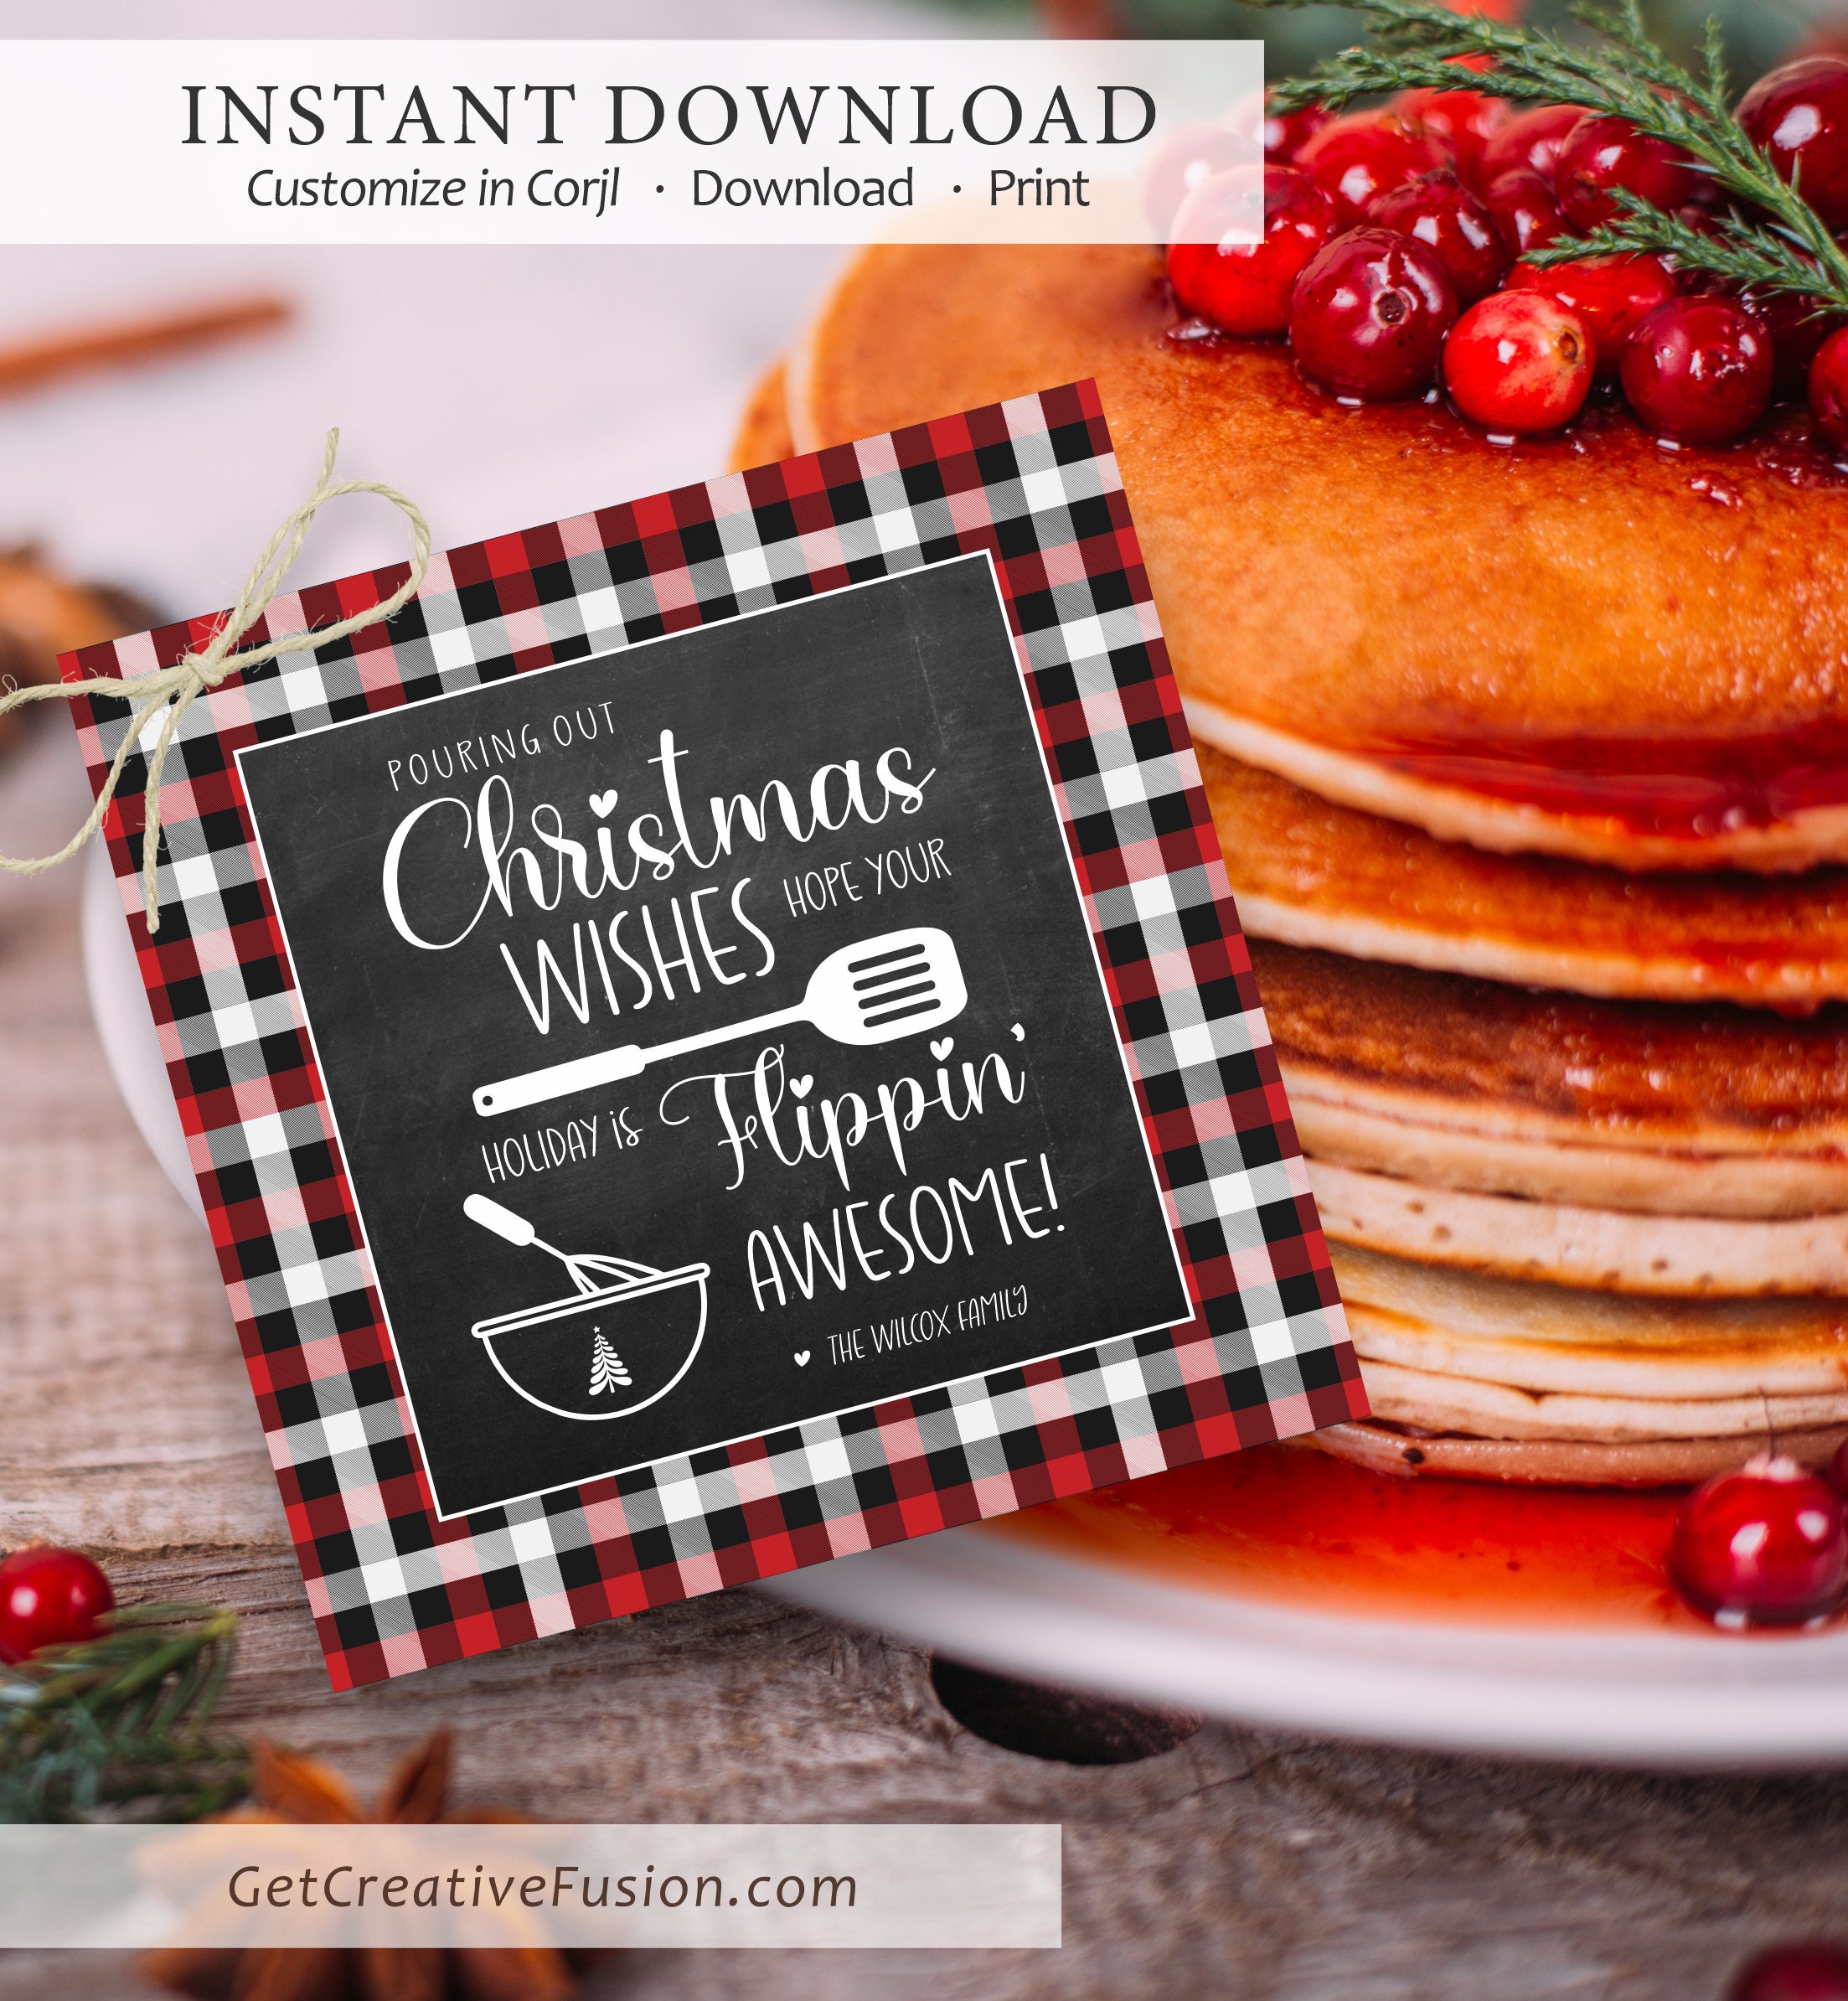 Pancake House Makes Christmas Hassle-Free With Party To-Go Trays!